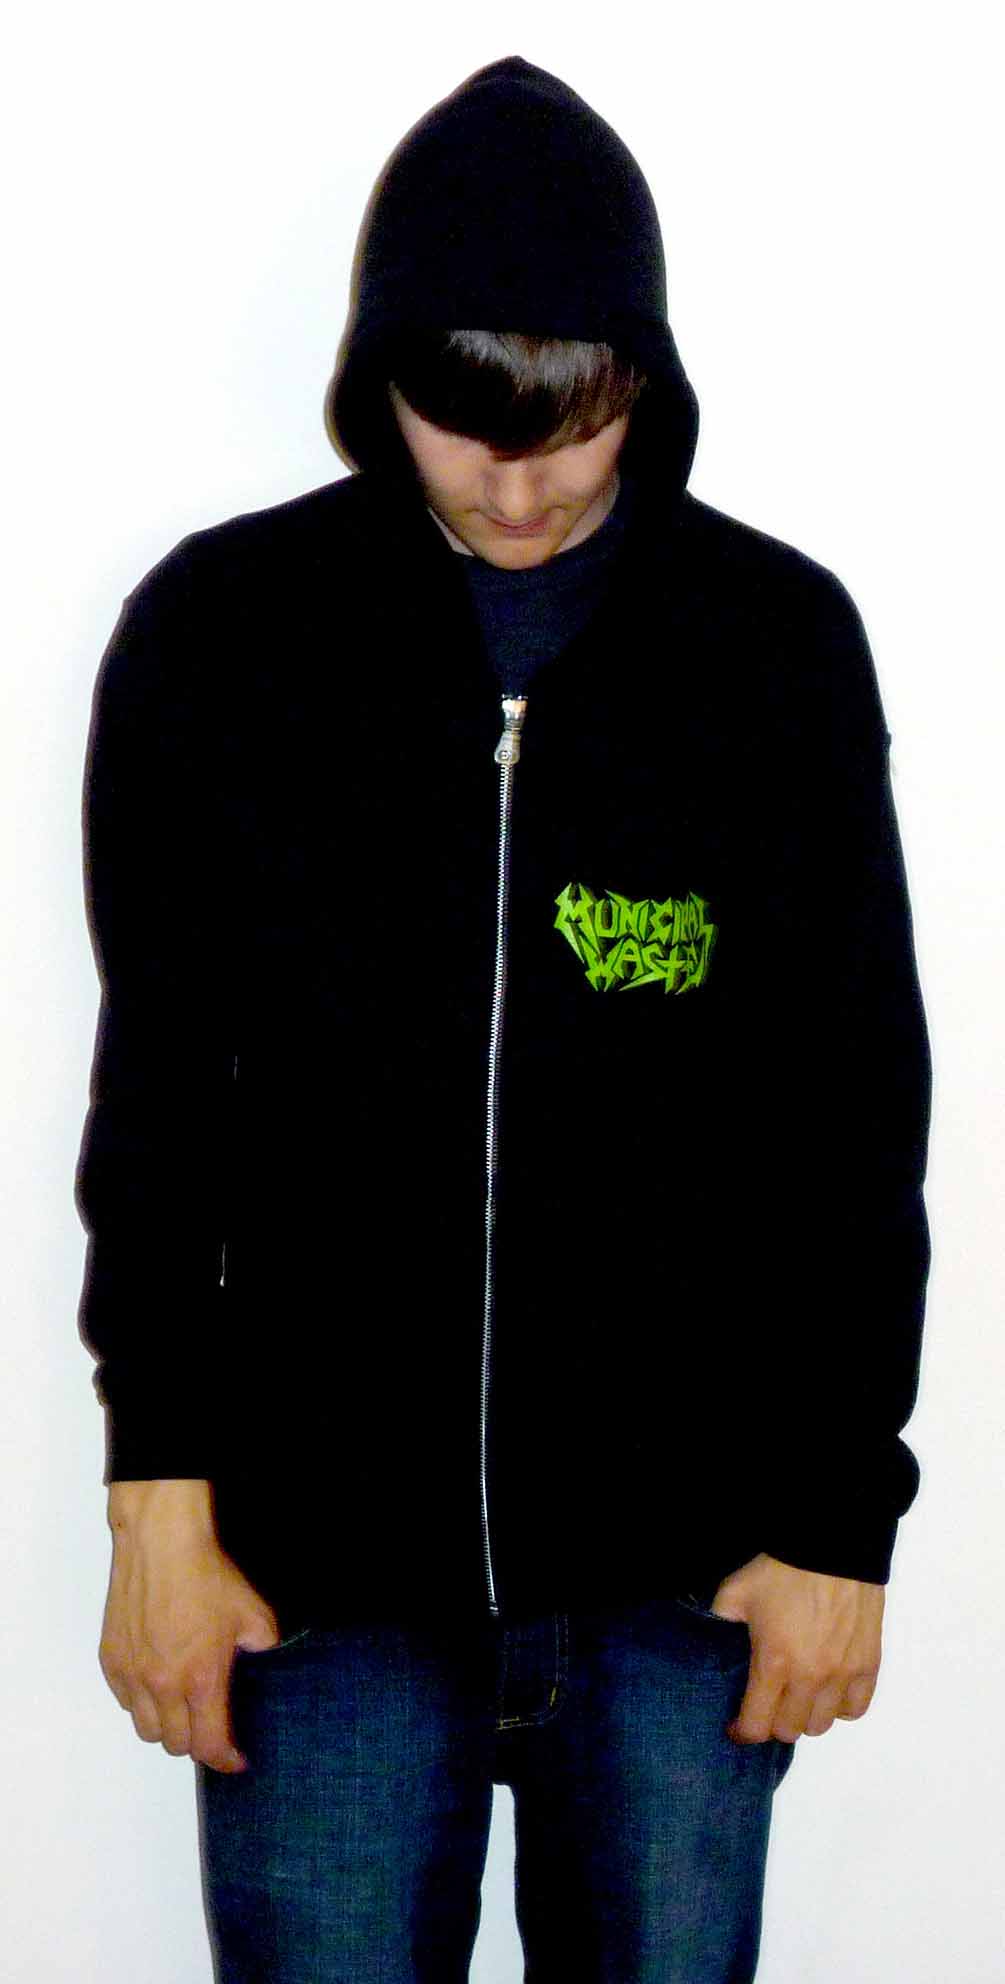 Municipal Waste "The Art Of Partying" Zip Up Hoodie